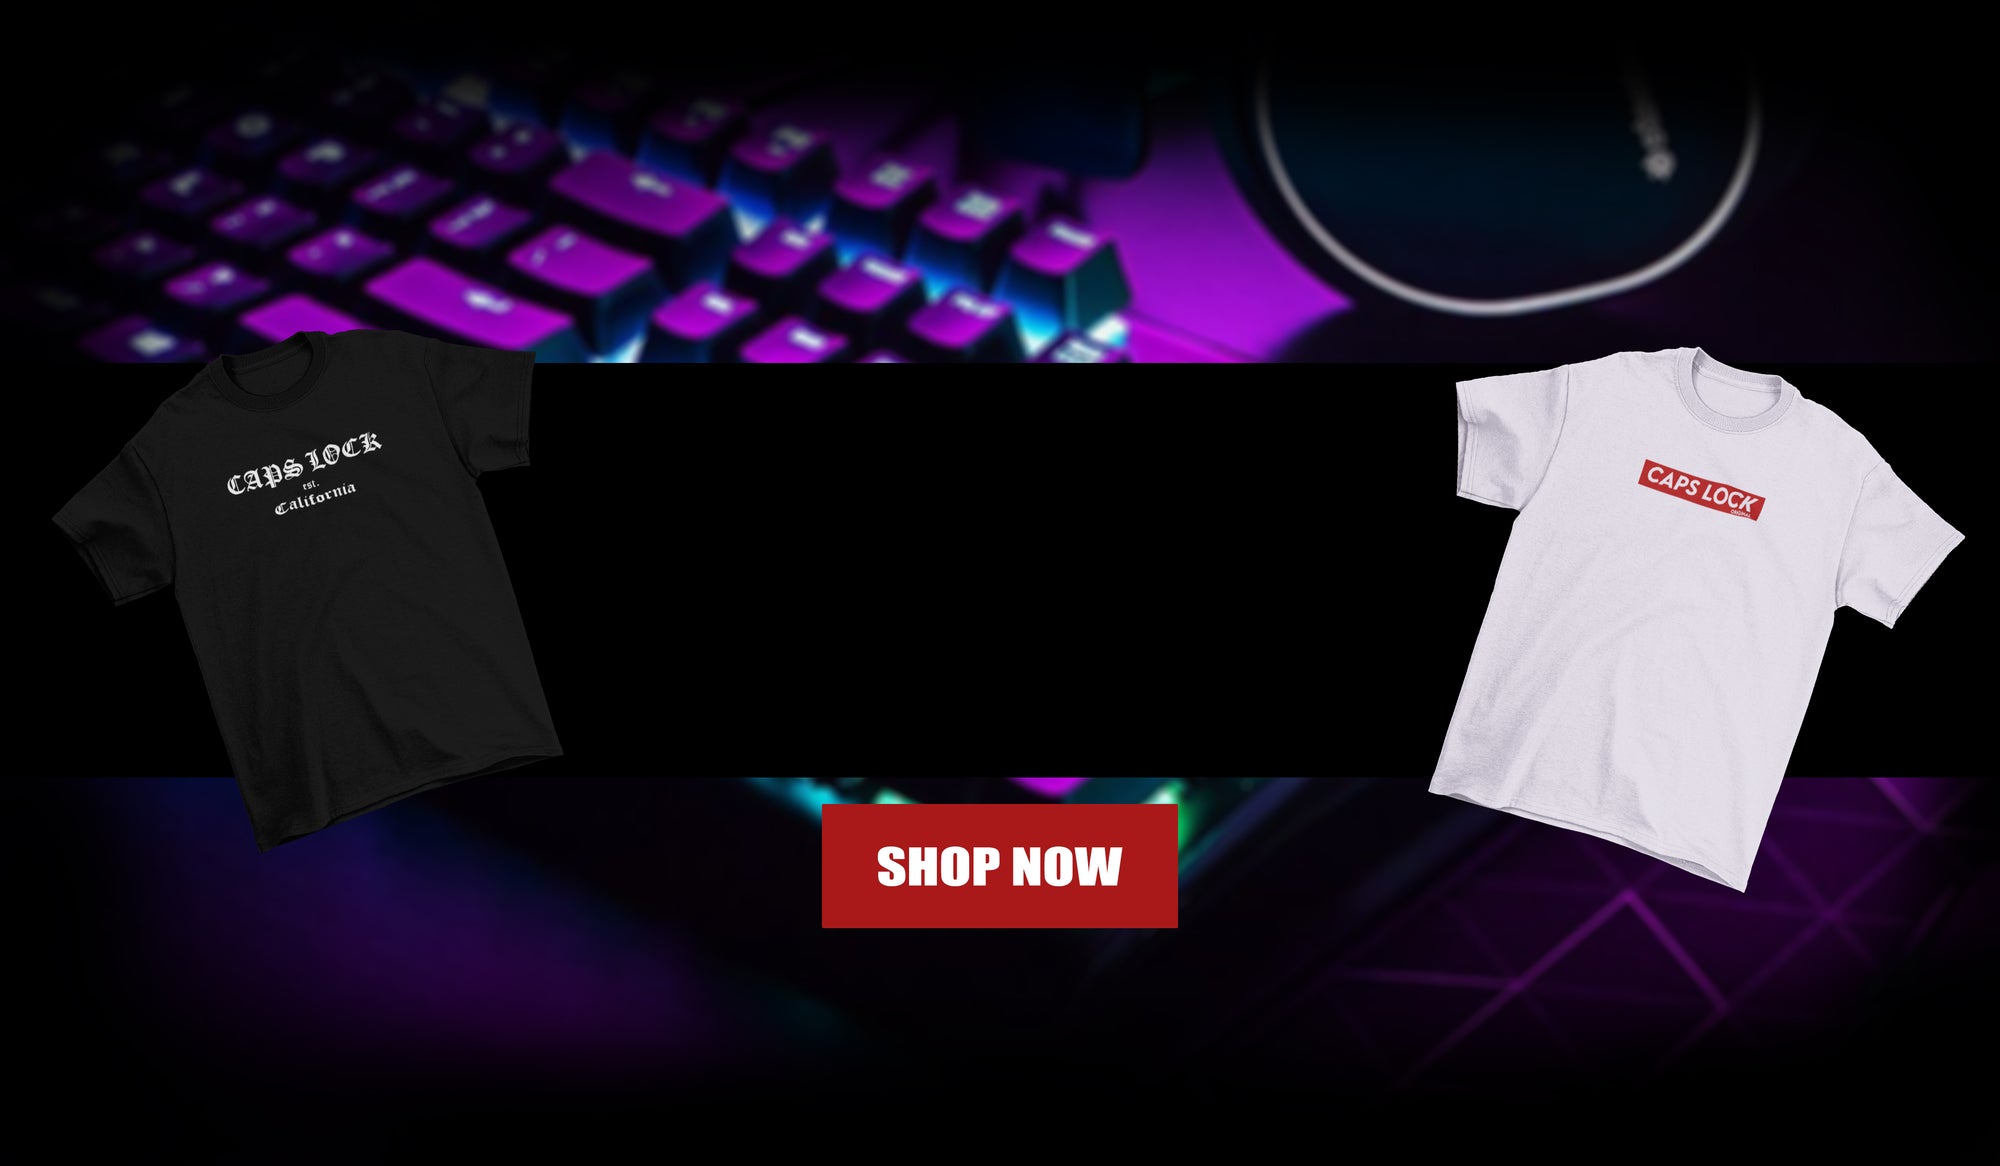 Discover our latest collection of CAPS LOCK ORIGINAL shirts with this captivating banner image, showcasing two trendy designs on display. Elevate your style game and make a bold statement with our premium quality shirts. This image is optimized to enhance the user experience on our website.